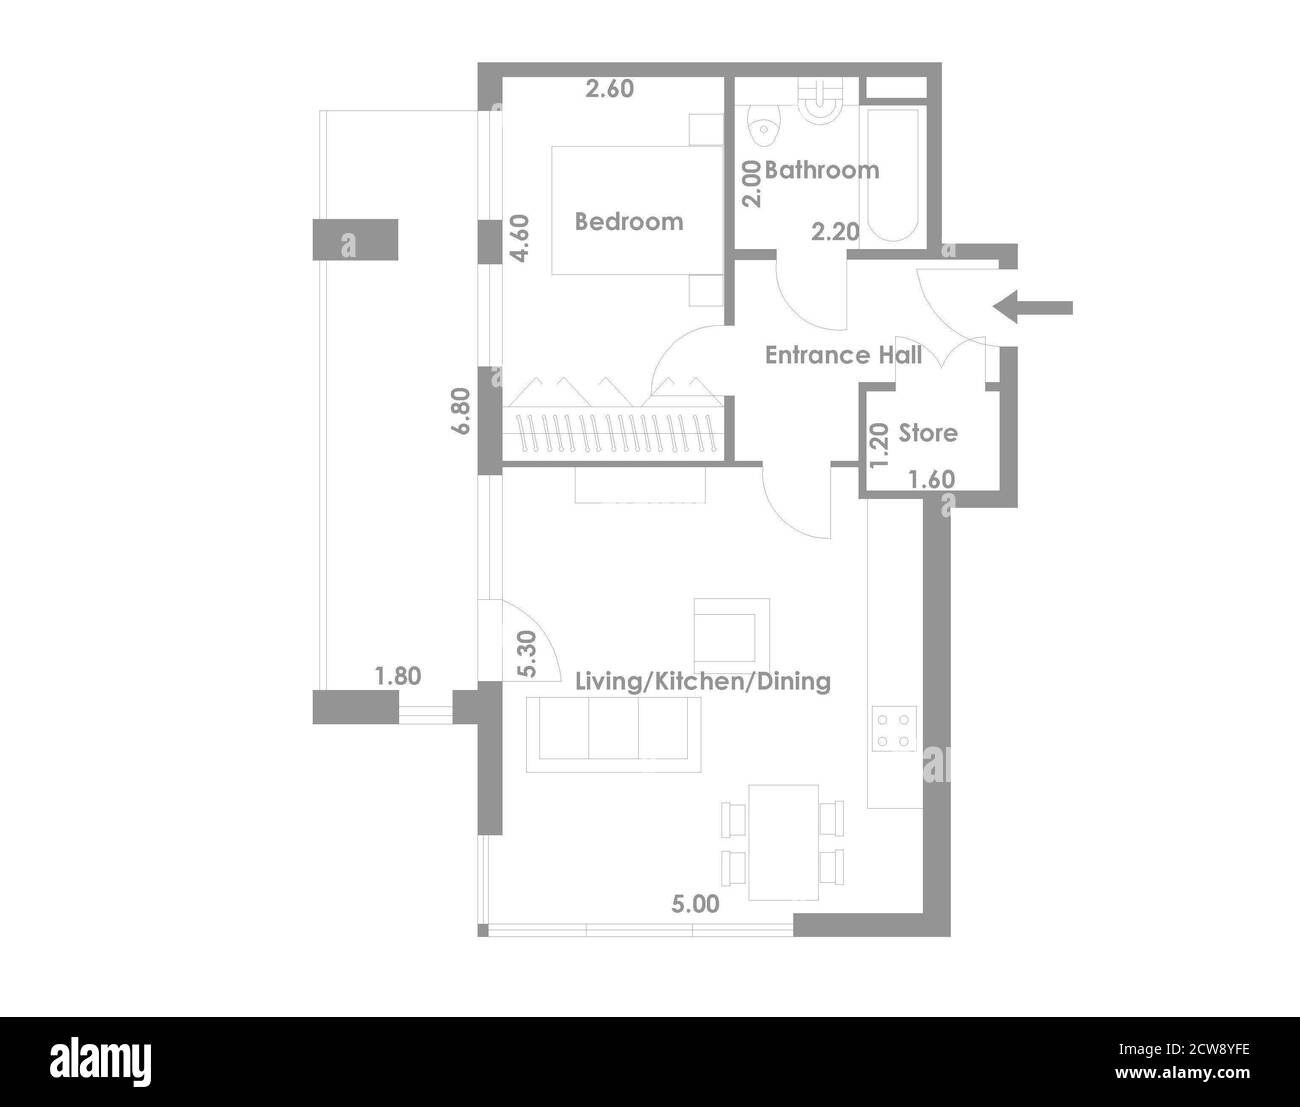 Drawing. 2d floor plan. Black&white floor plan. House with interior, floor plan, blueprints and colored walls on a white background. Stock Photo